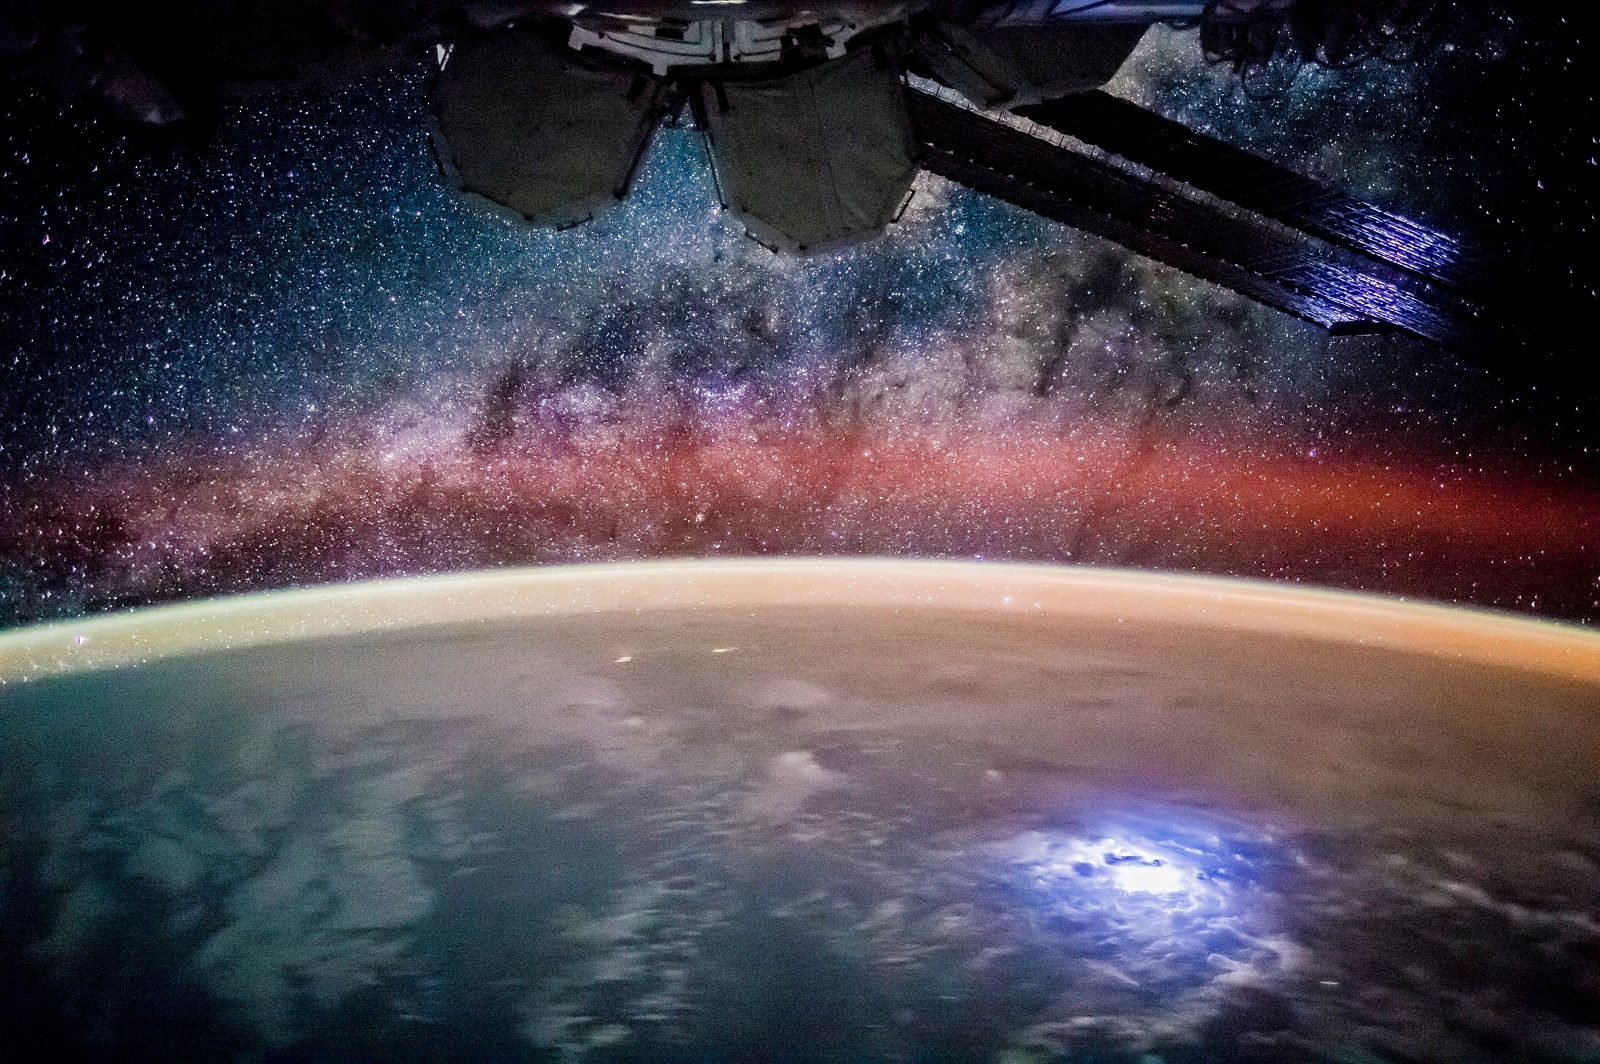 Amazing images from the International Space Station image 39